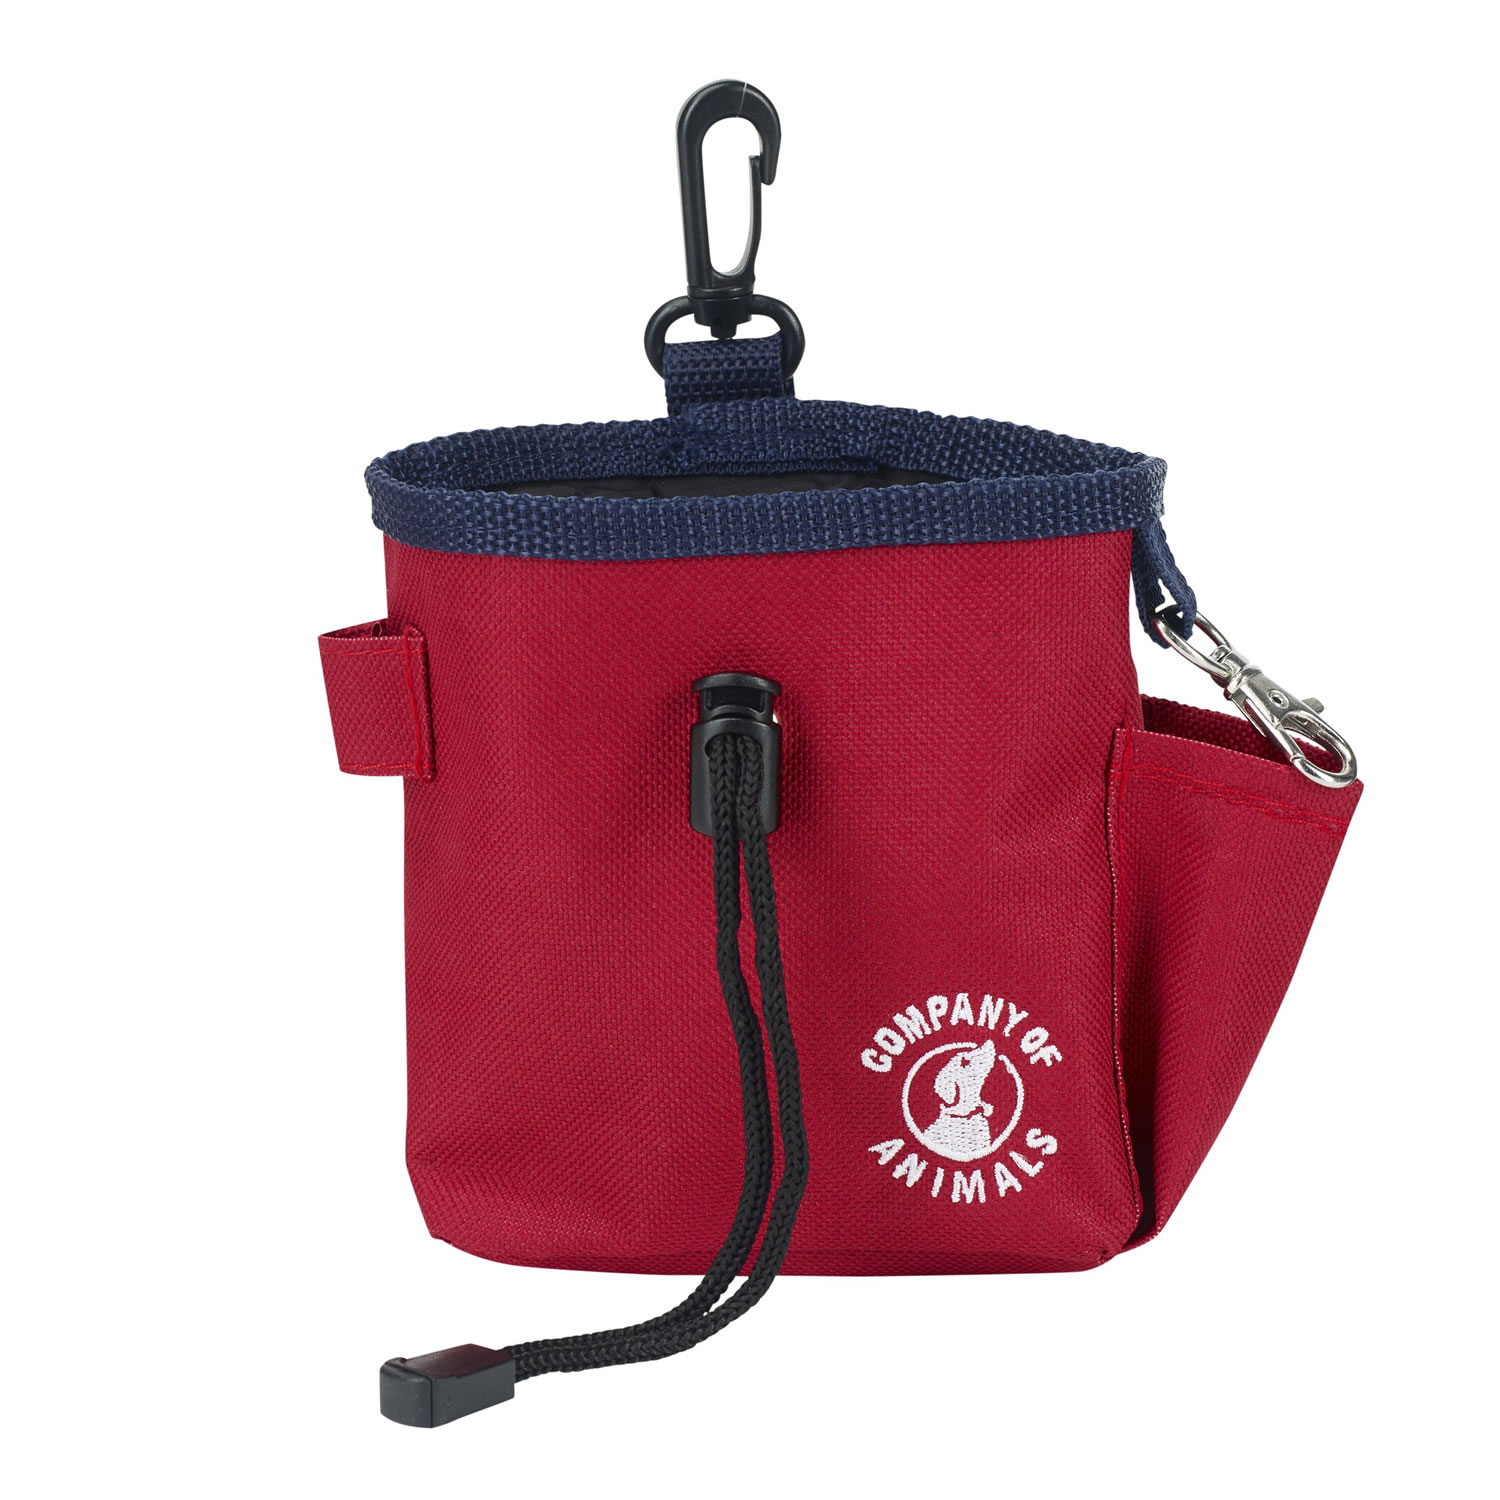 CO OF ANIMALS TREAT BAG RED